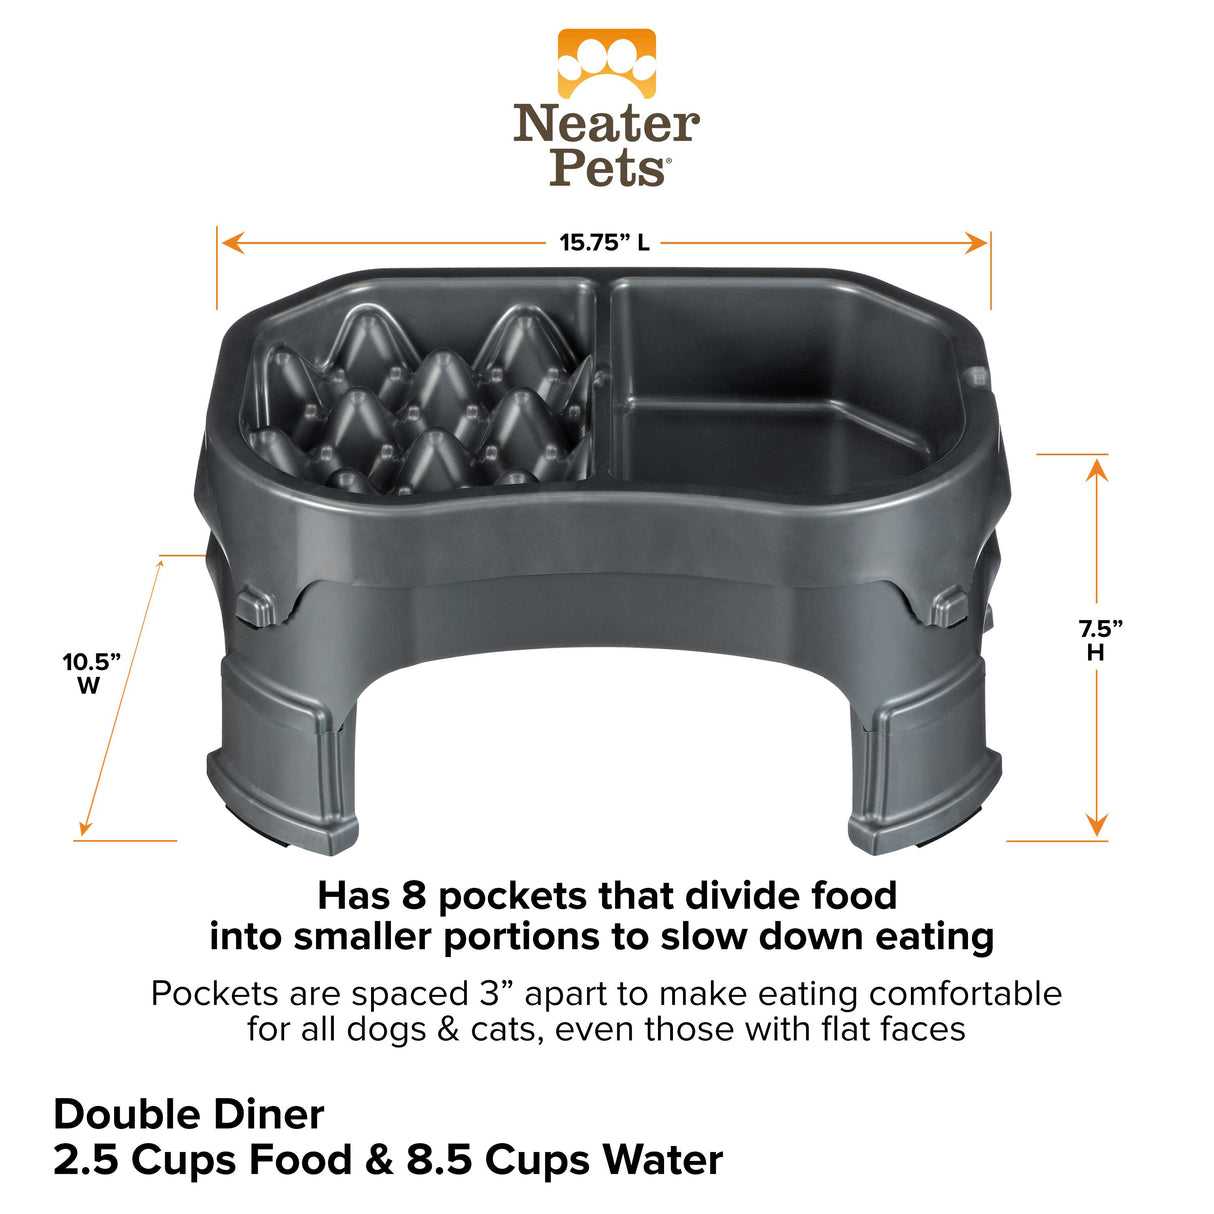 Raised Neater Slow Feeder Double Diner dimensions